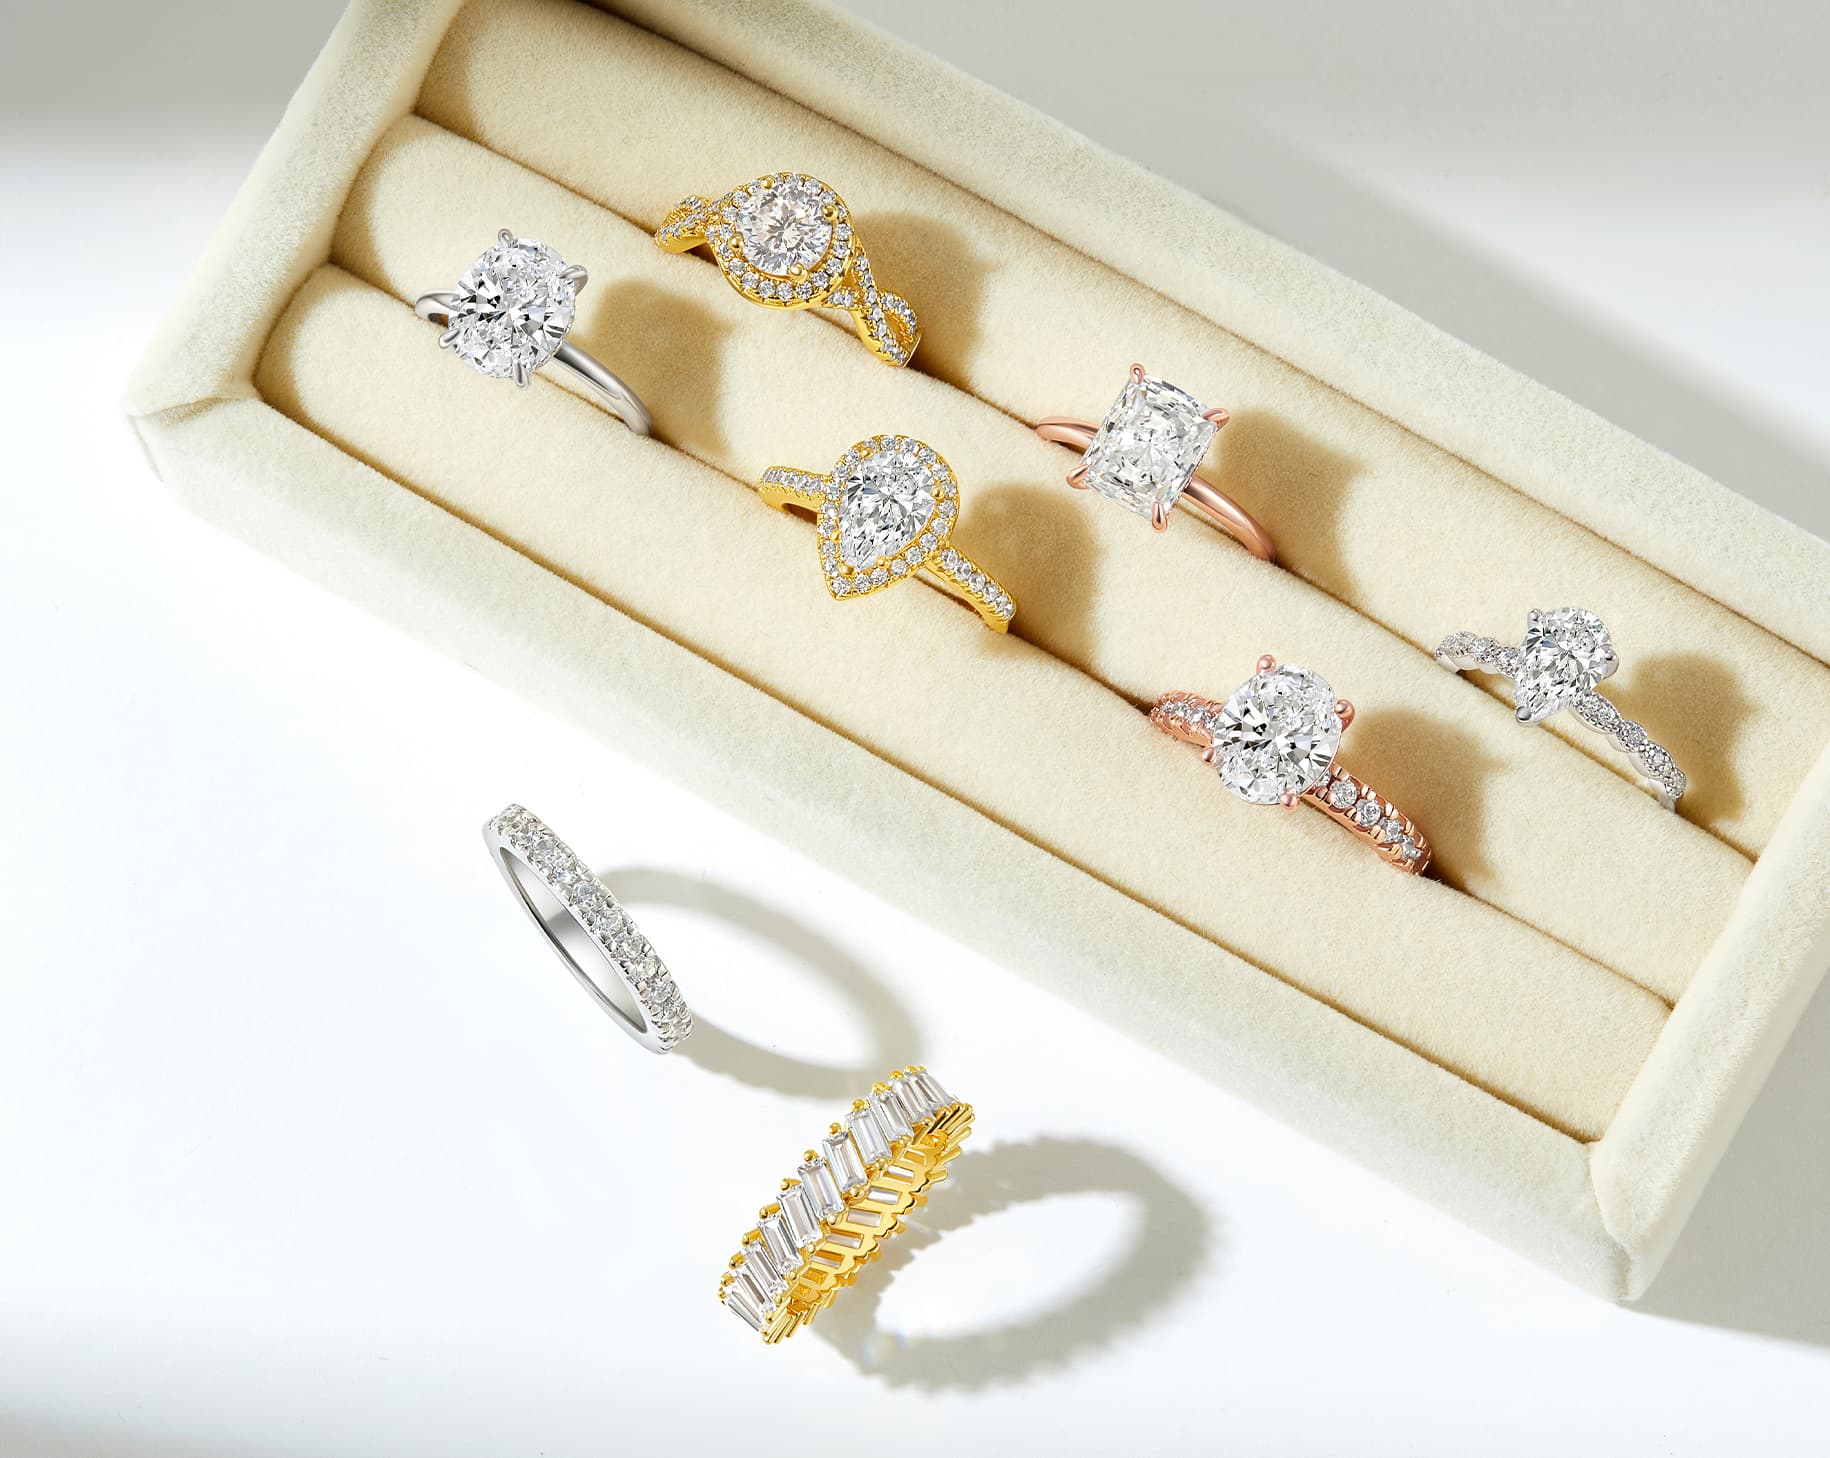 gorgeous array of engagement rings and wedding bands in silver, gold, and rose gold